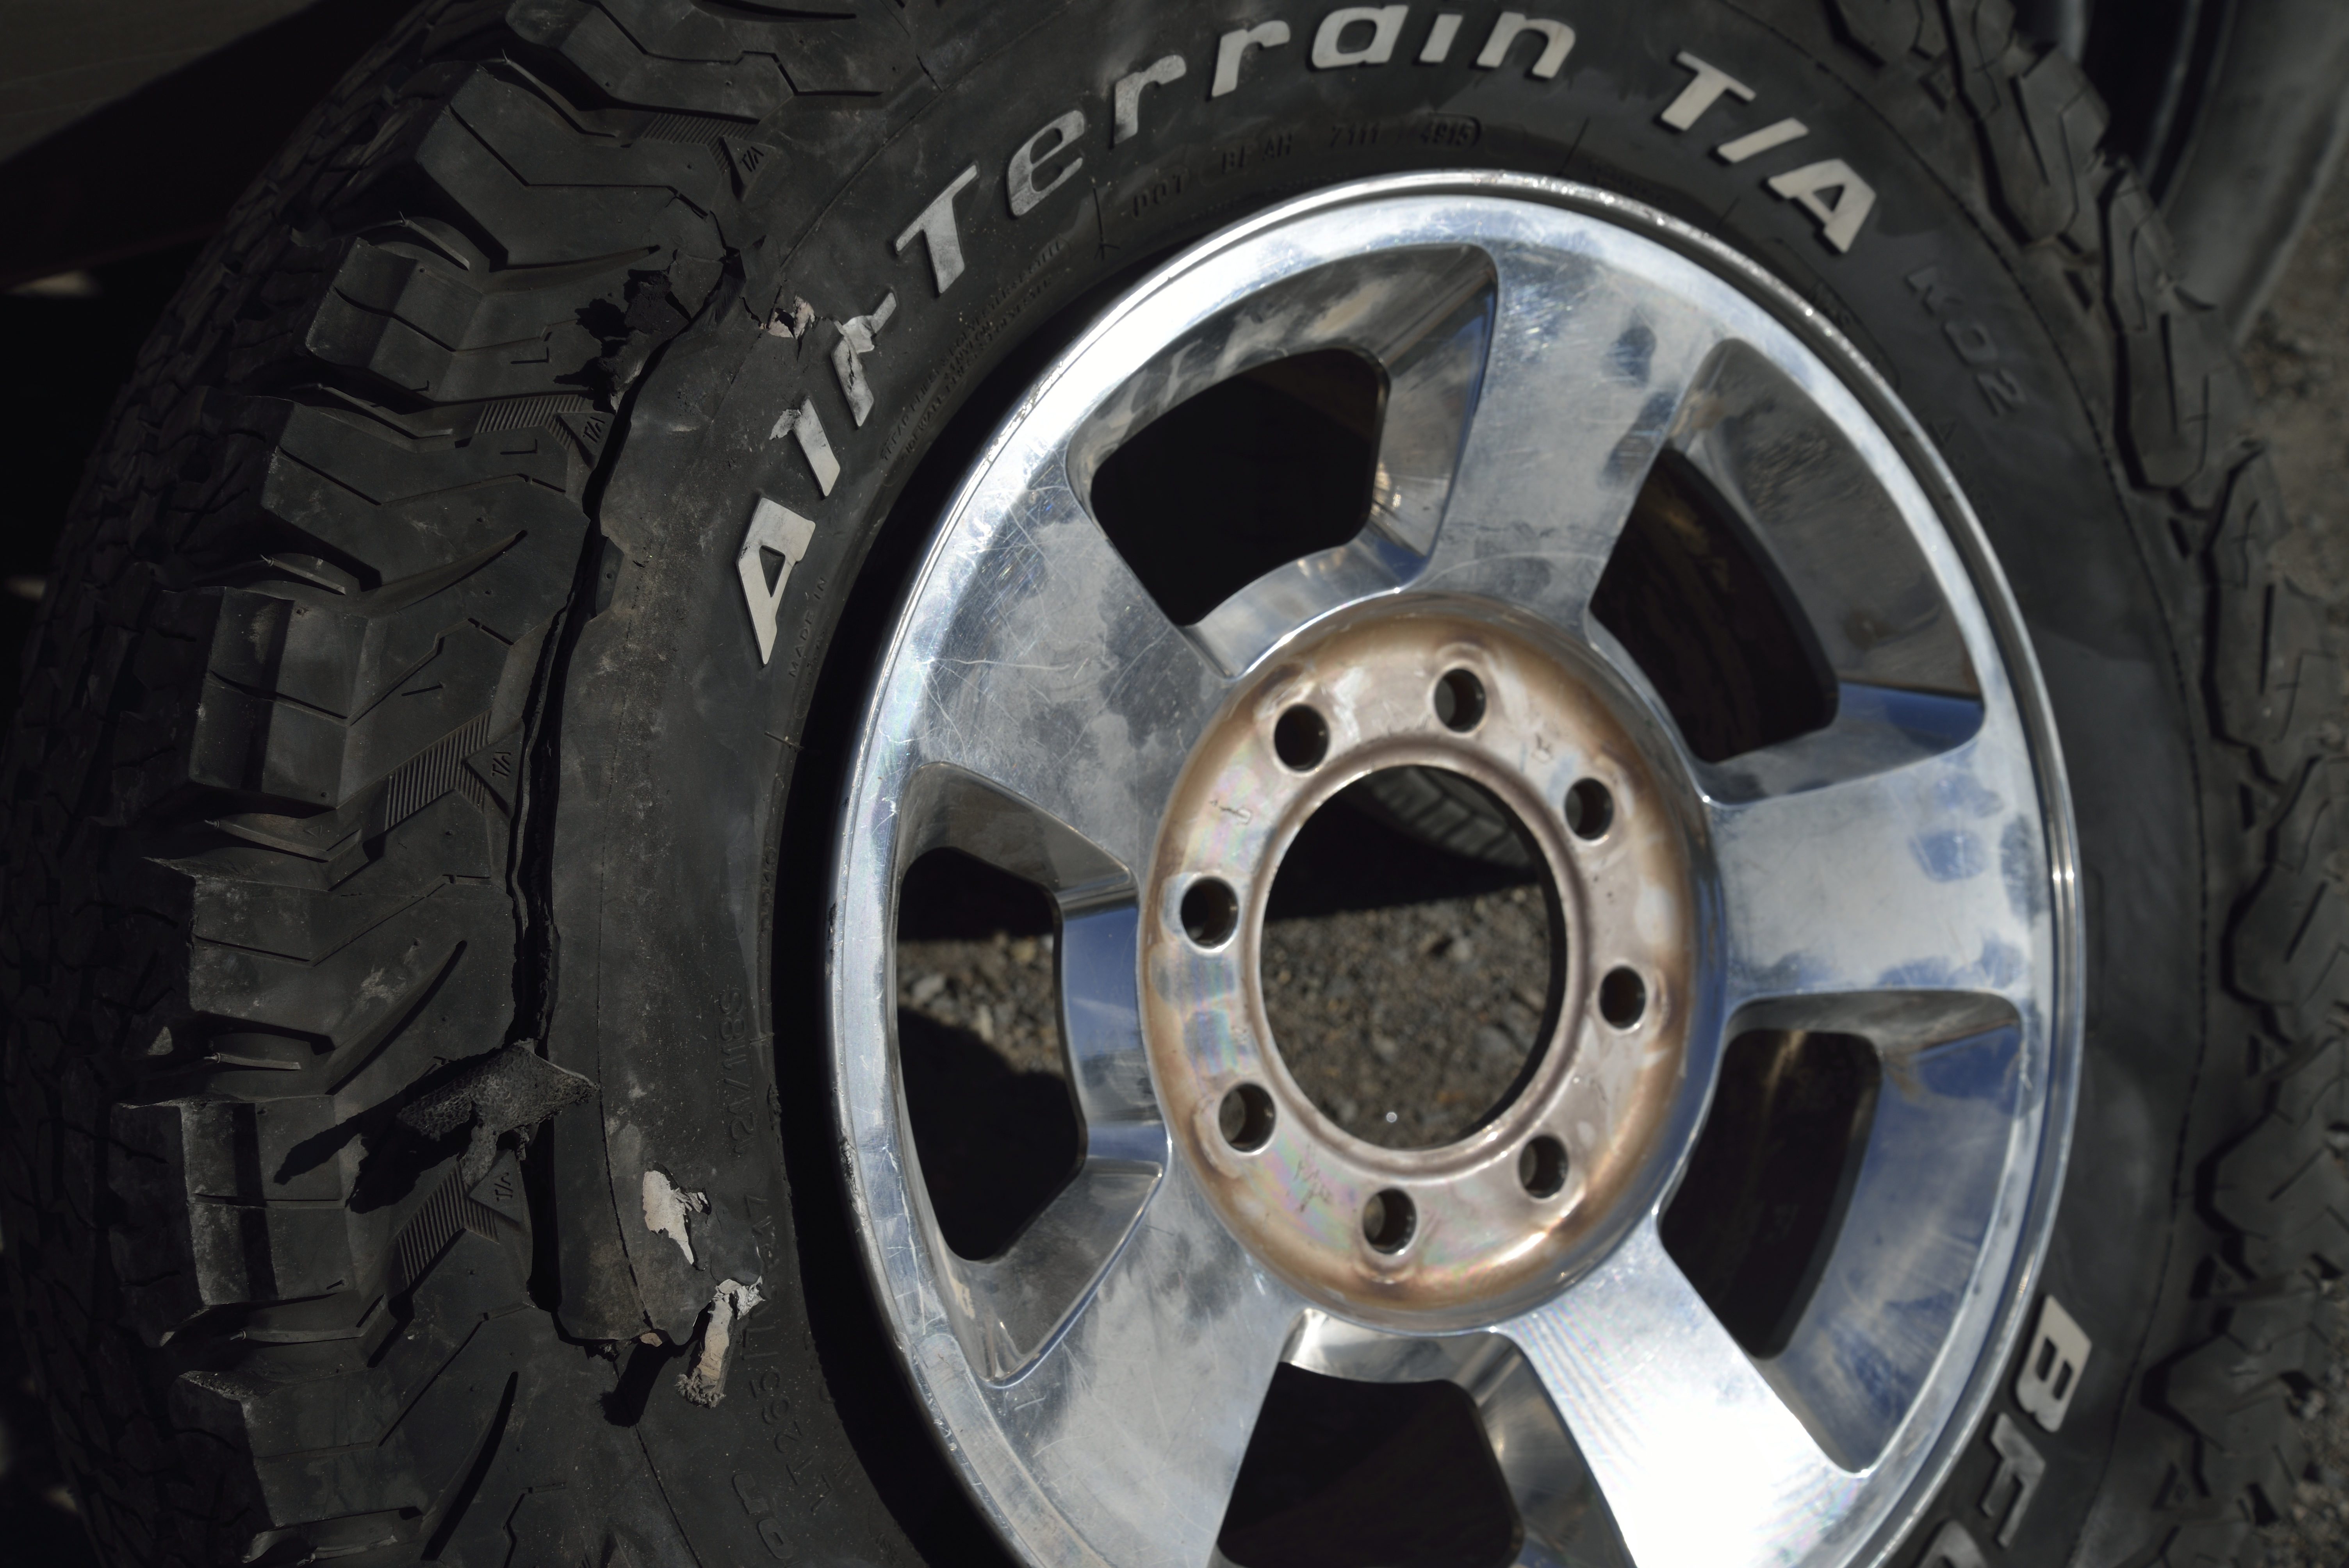 What do reviews typically say about Goodride tires?